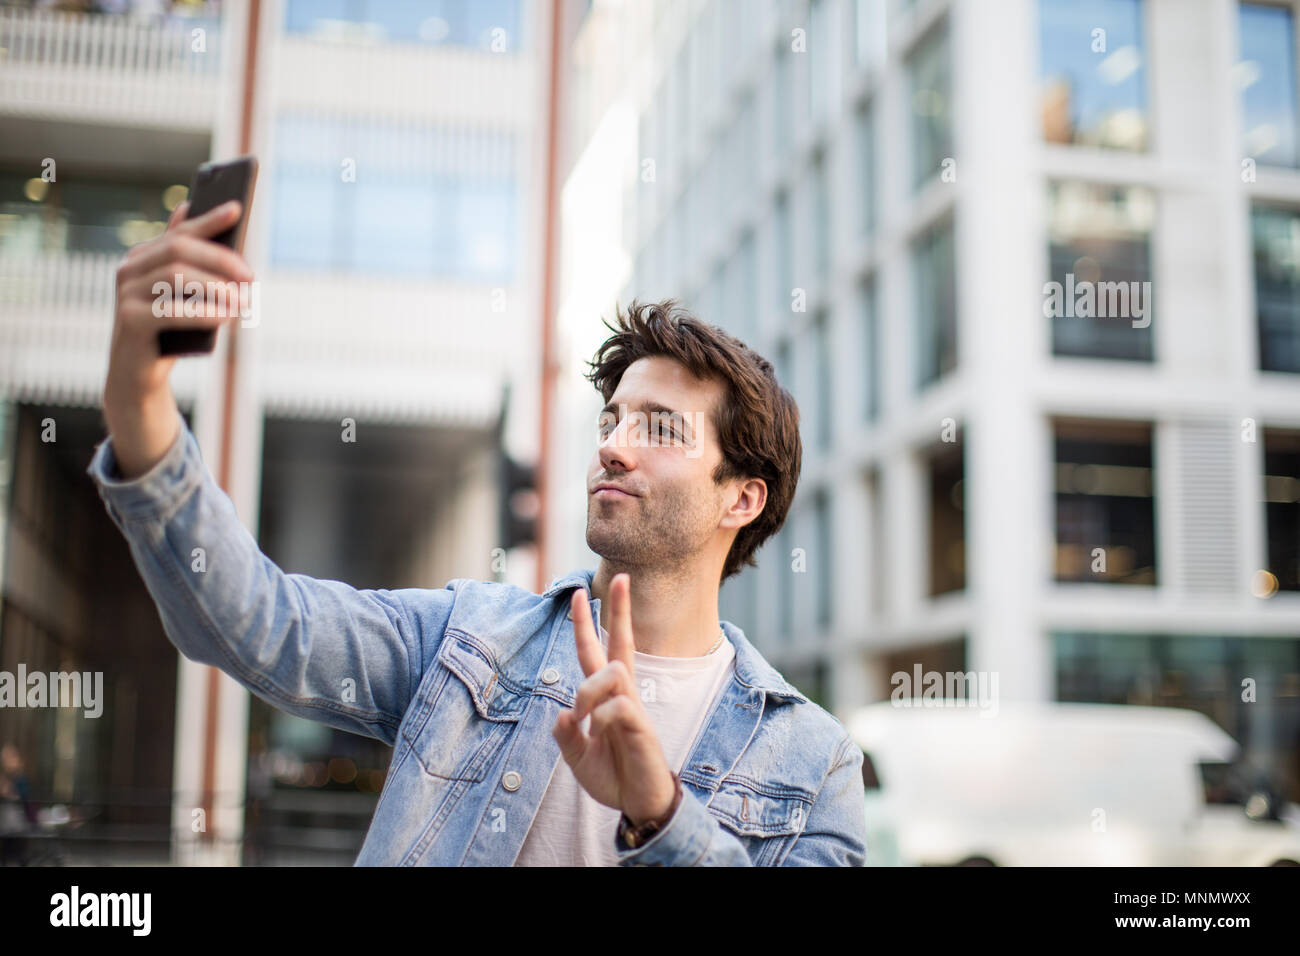 Young adult male tourist posing for selfie Stock Photo